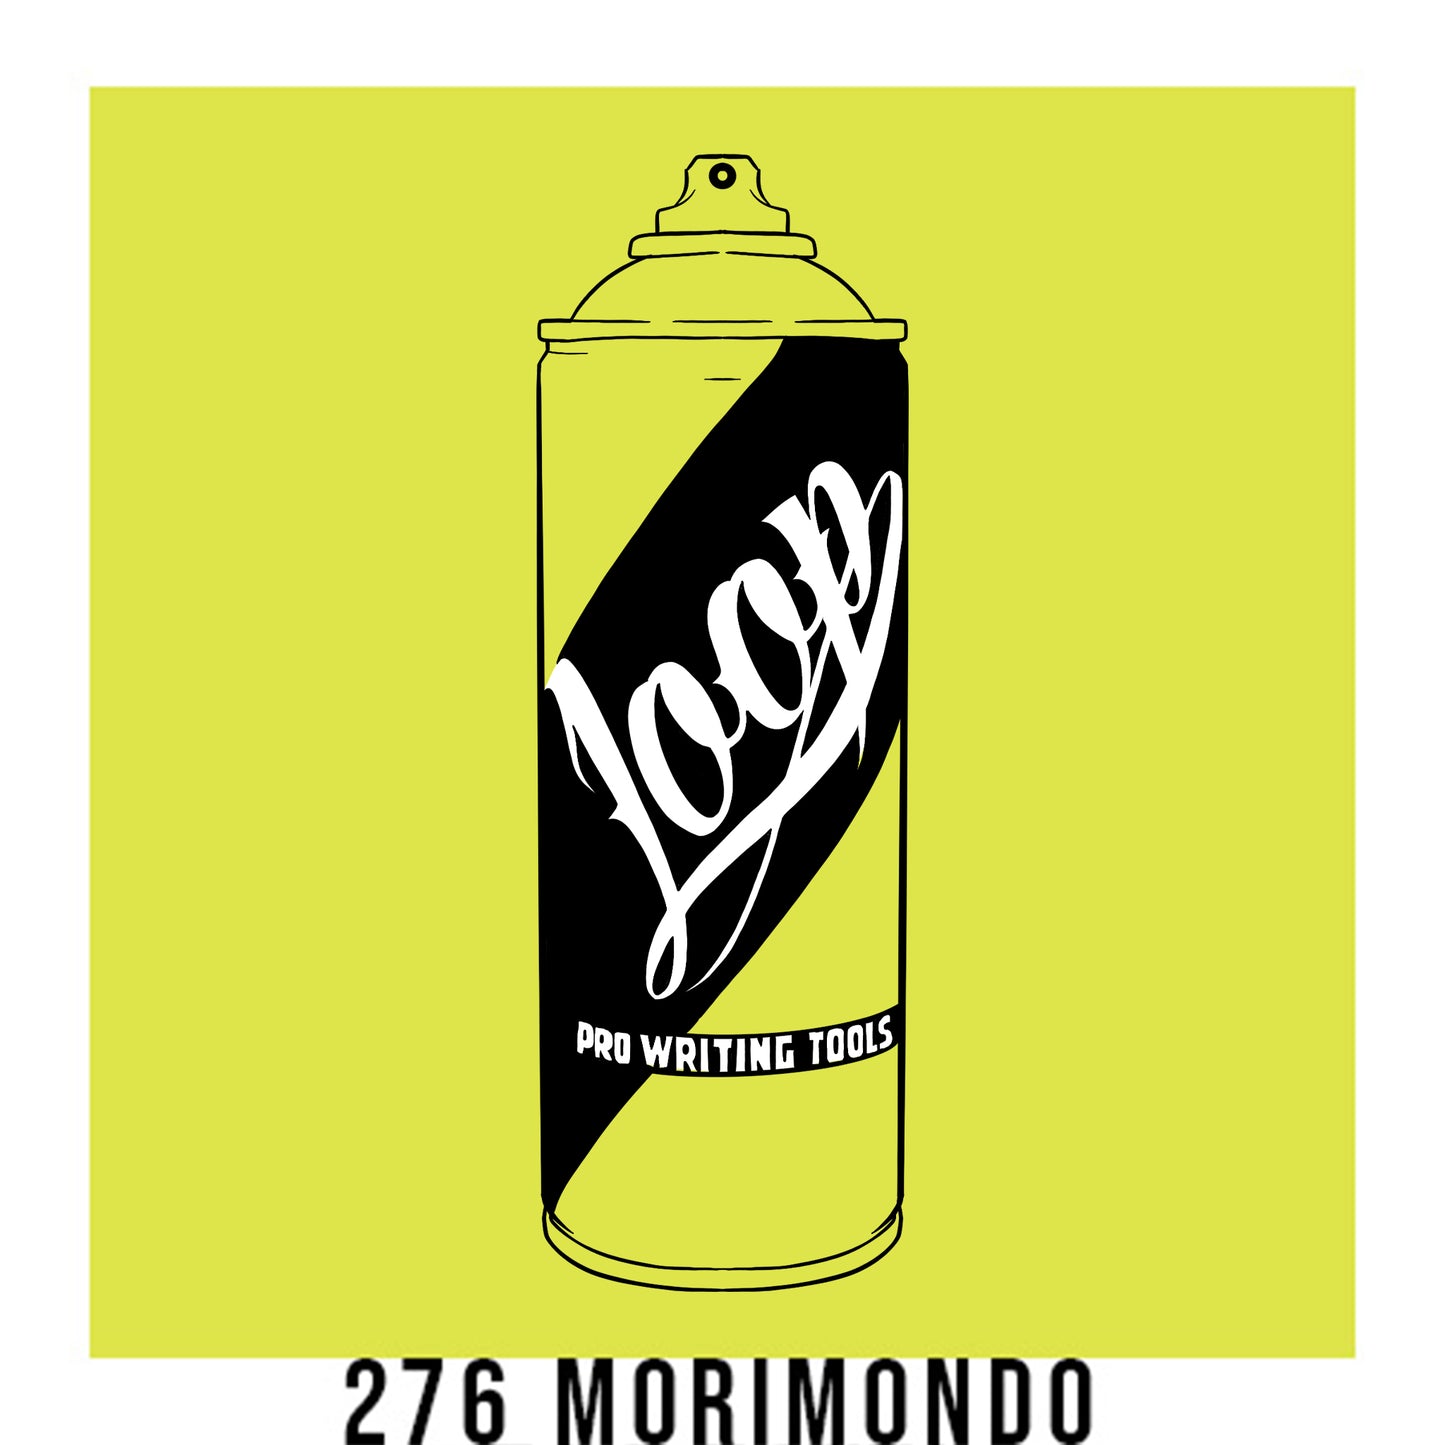 A black outline drawing of a Yellow Green spray paint can with the word "Loop" written on the face in script. The background is a color swatch of the same Yellow Green with a white border with the words "276 Morimondo" at the bottom.